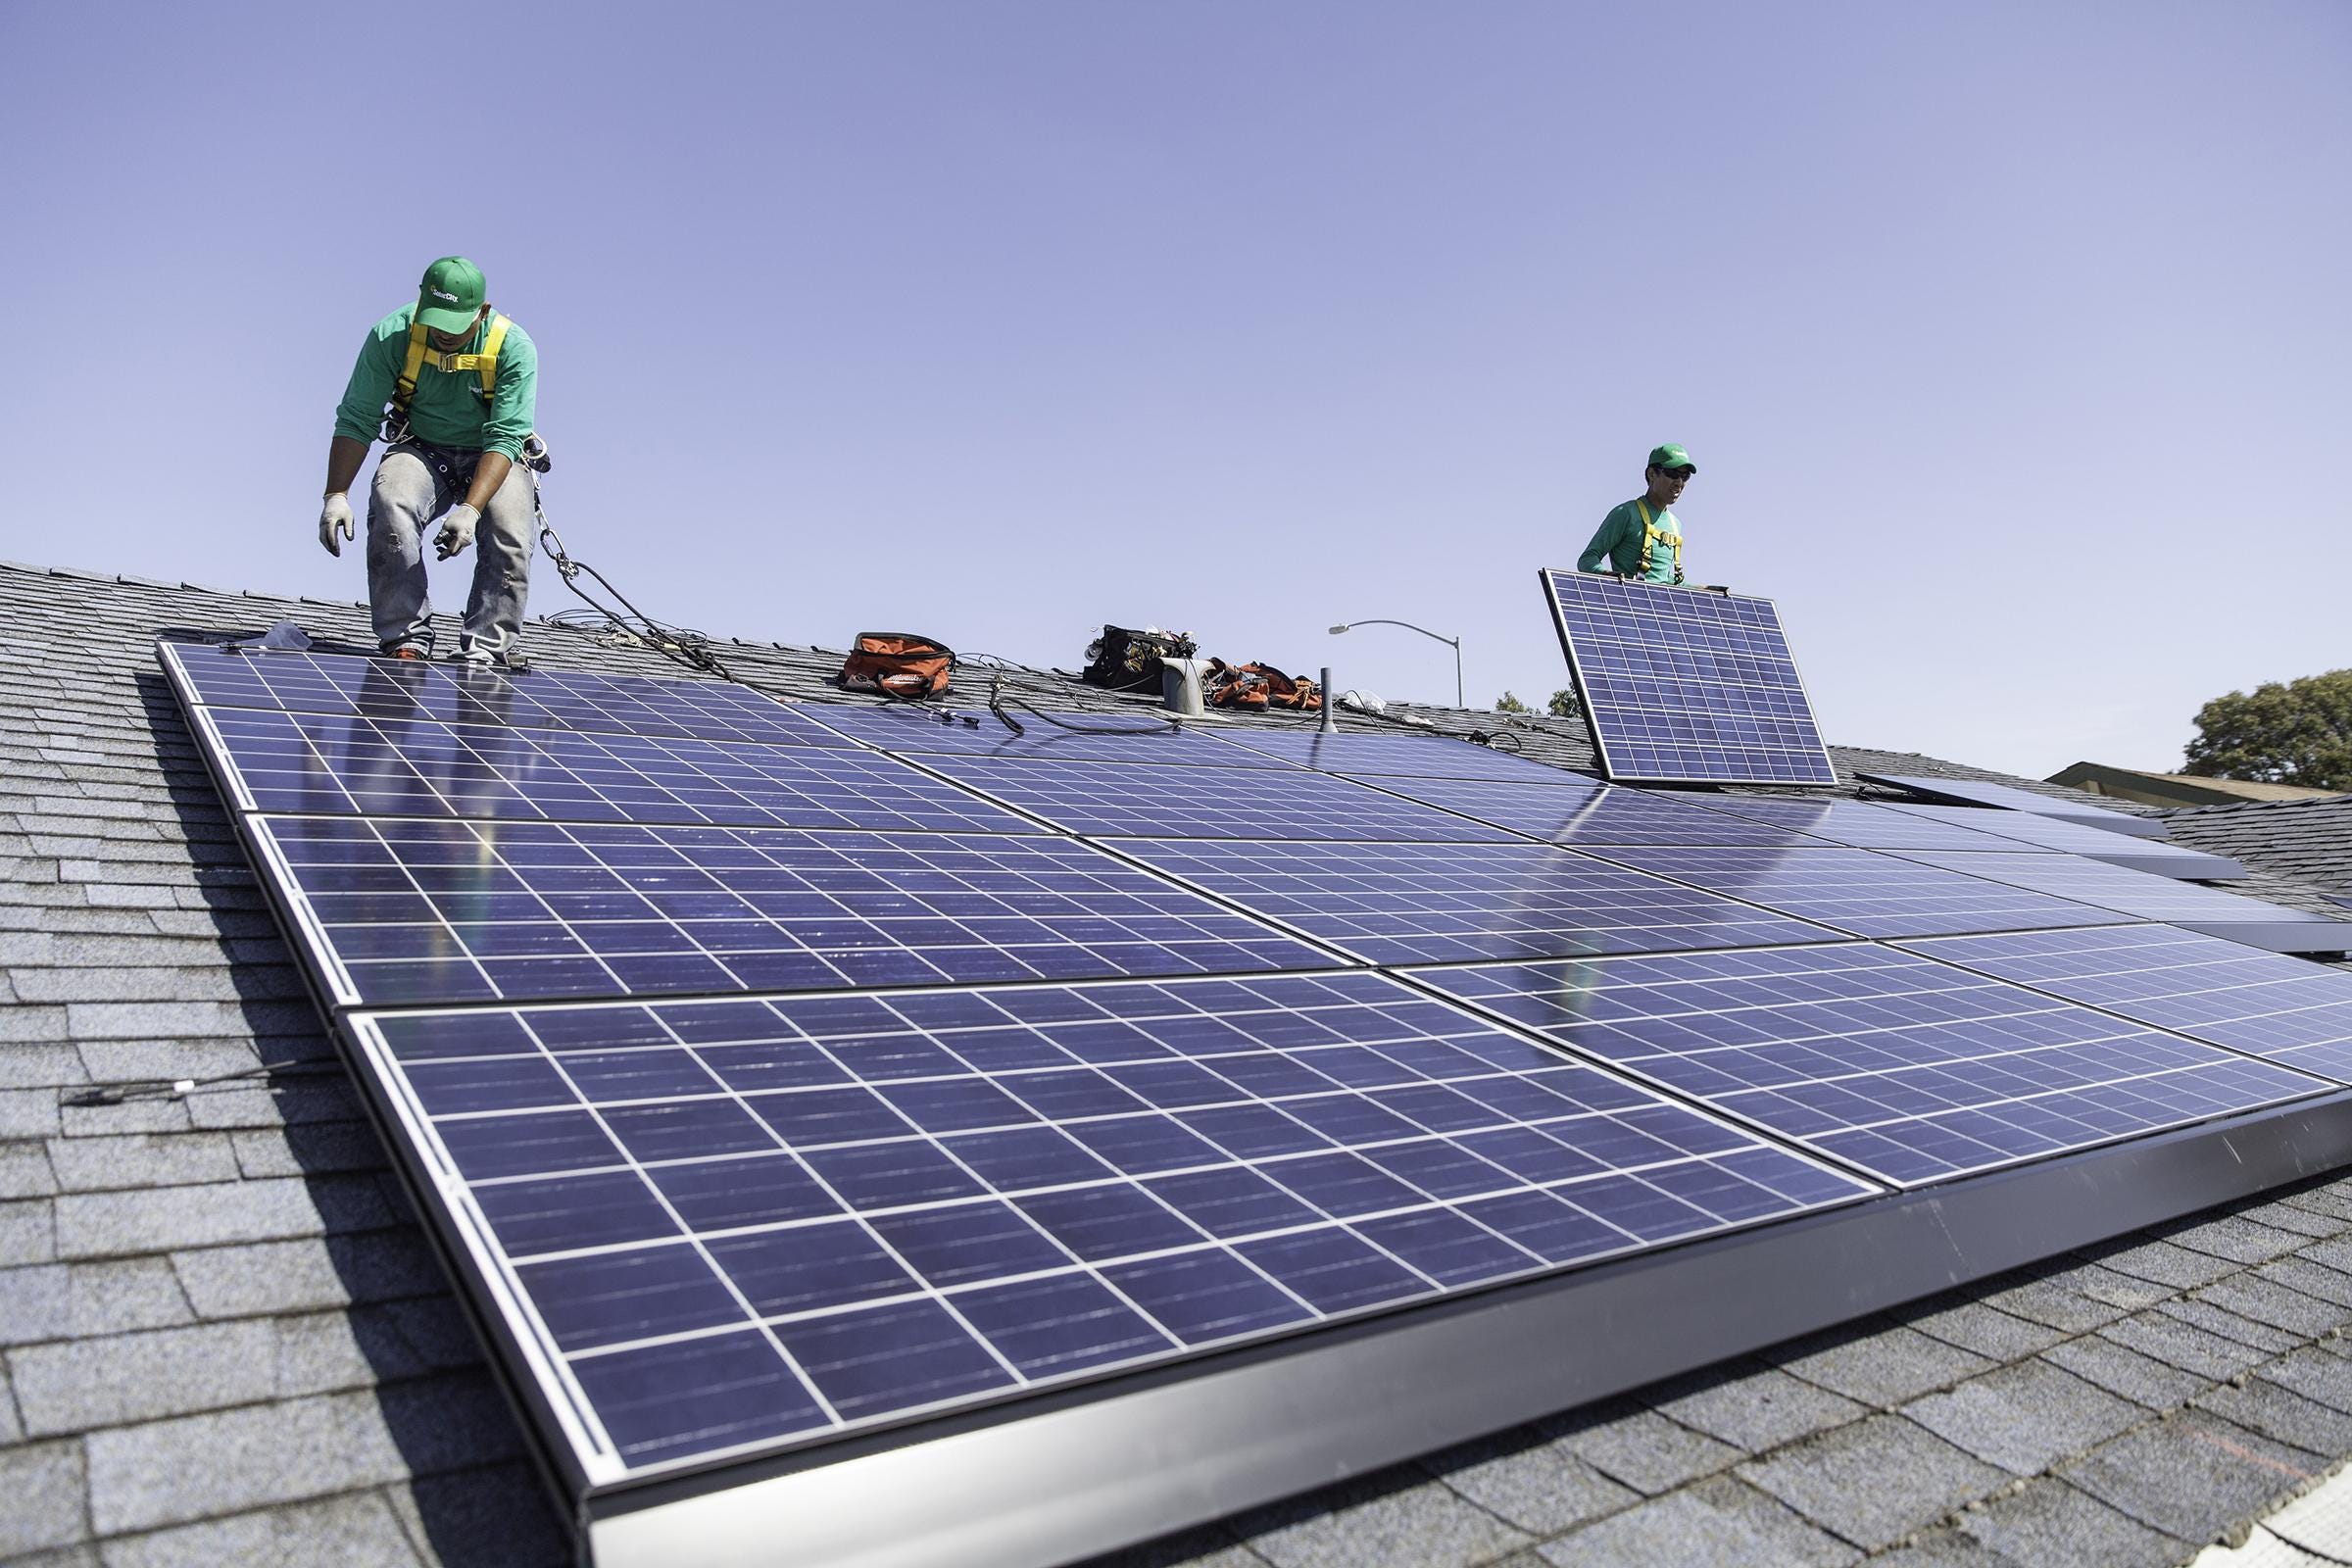 NV Energy challenges ruling on rooftop solar